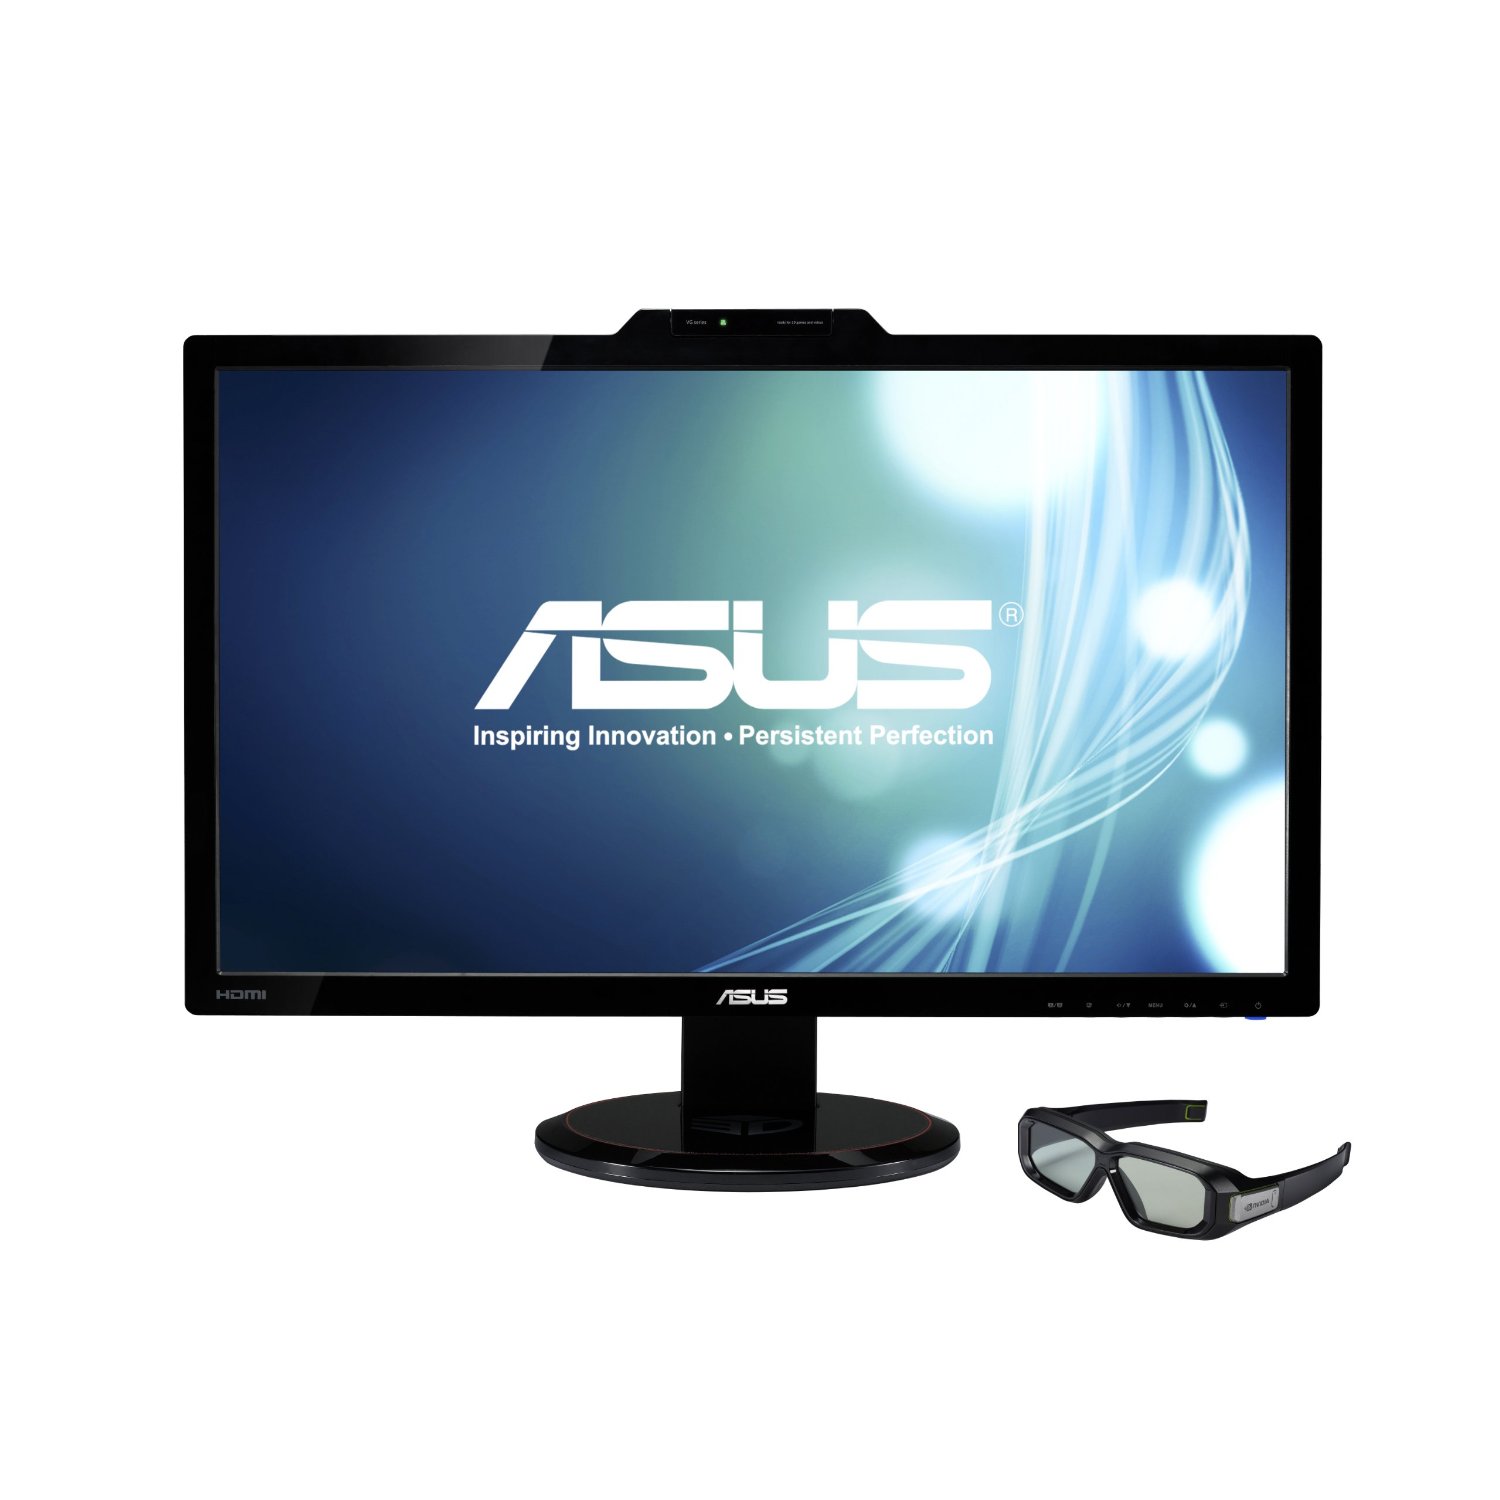 http://thetechjournal.com/wp-content/uploads/images/1207/1341219564-asus-vg278h-27inch-3d-fullhd-led-monitor-with-integrated-stereo-speakers-5.jpg